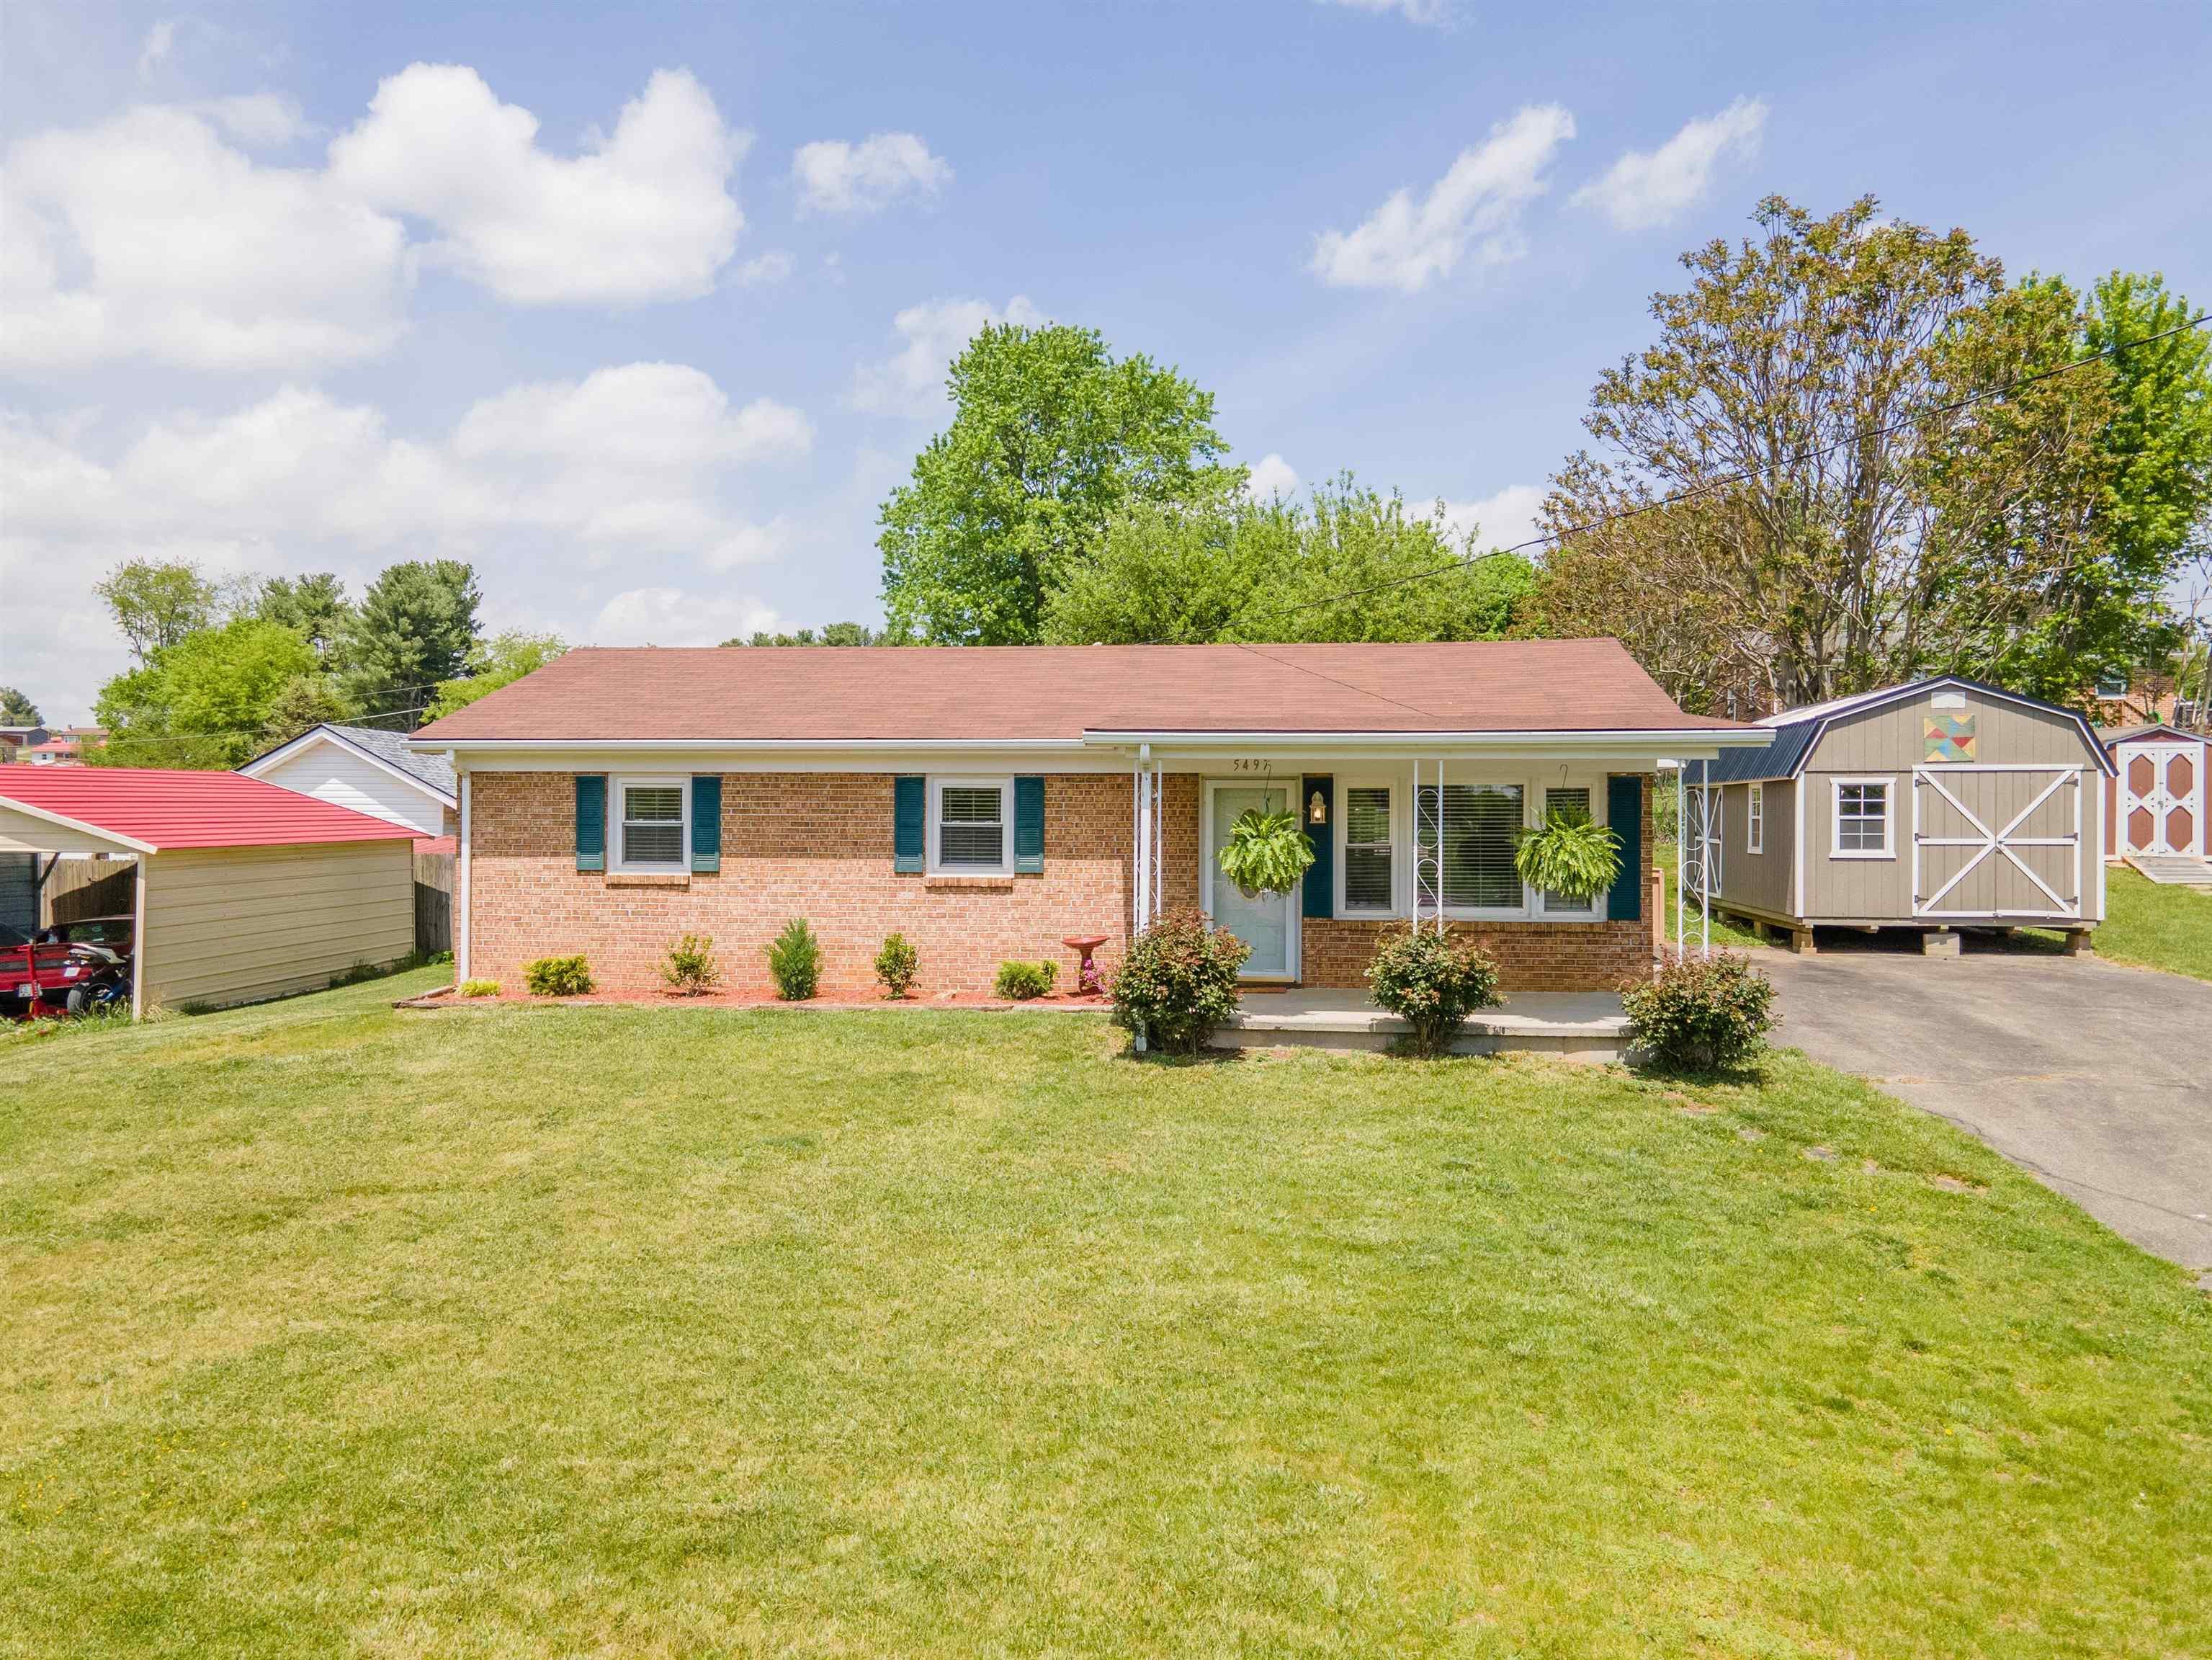 Don't miss the opportunity to own this wonderful MOVE IN READY home in Dublin. This charming home is located on a quiet cul-de-sac close to I-81 and within walking distance to Dublin Elementary School. The home features a large deck for entertaining and is nicely landscaped with beautiful grape vines and trees. There is a huge wooden shed that could be used as an art studio or workshop.  All offers will be due by 10 am on Monday 5-16-22.